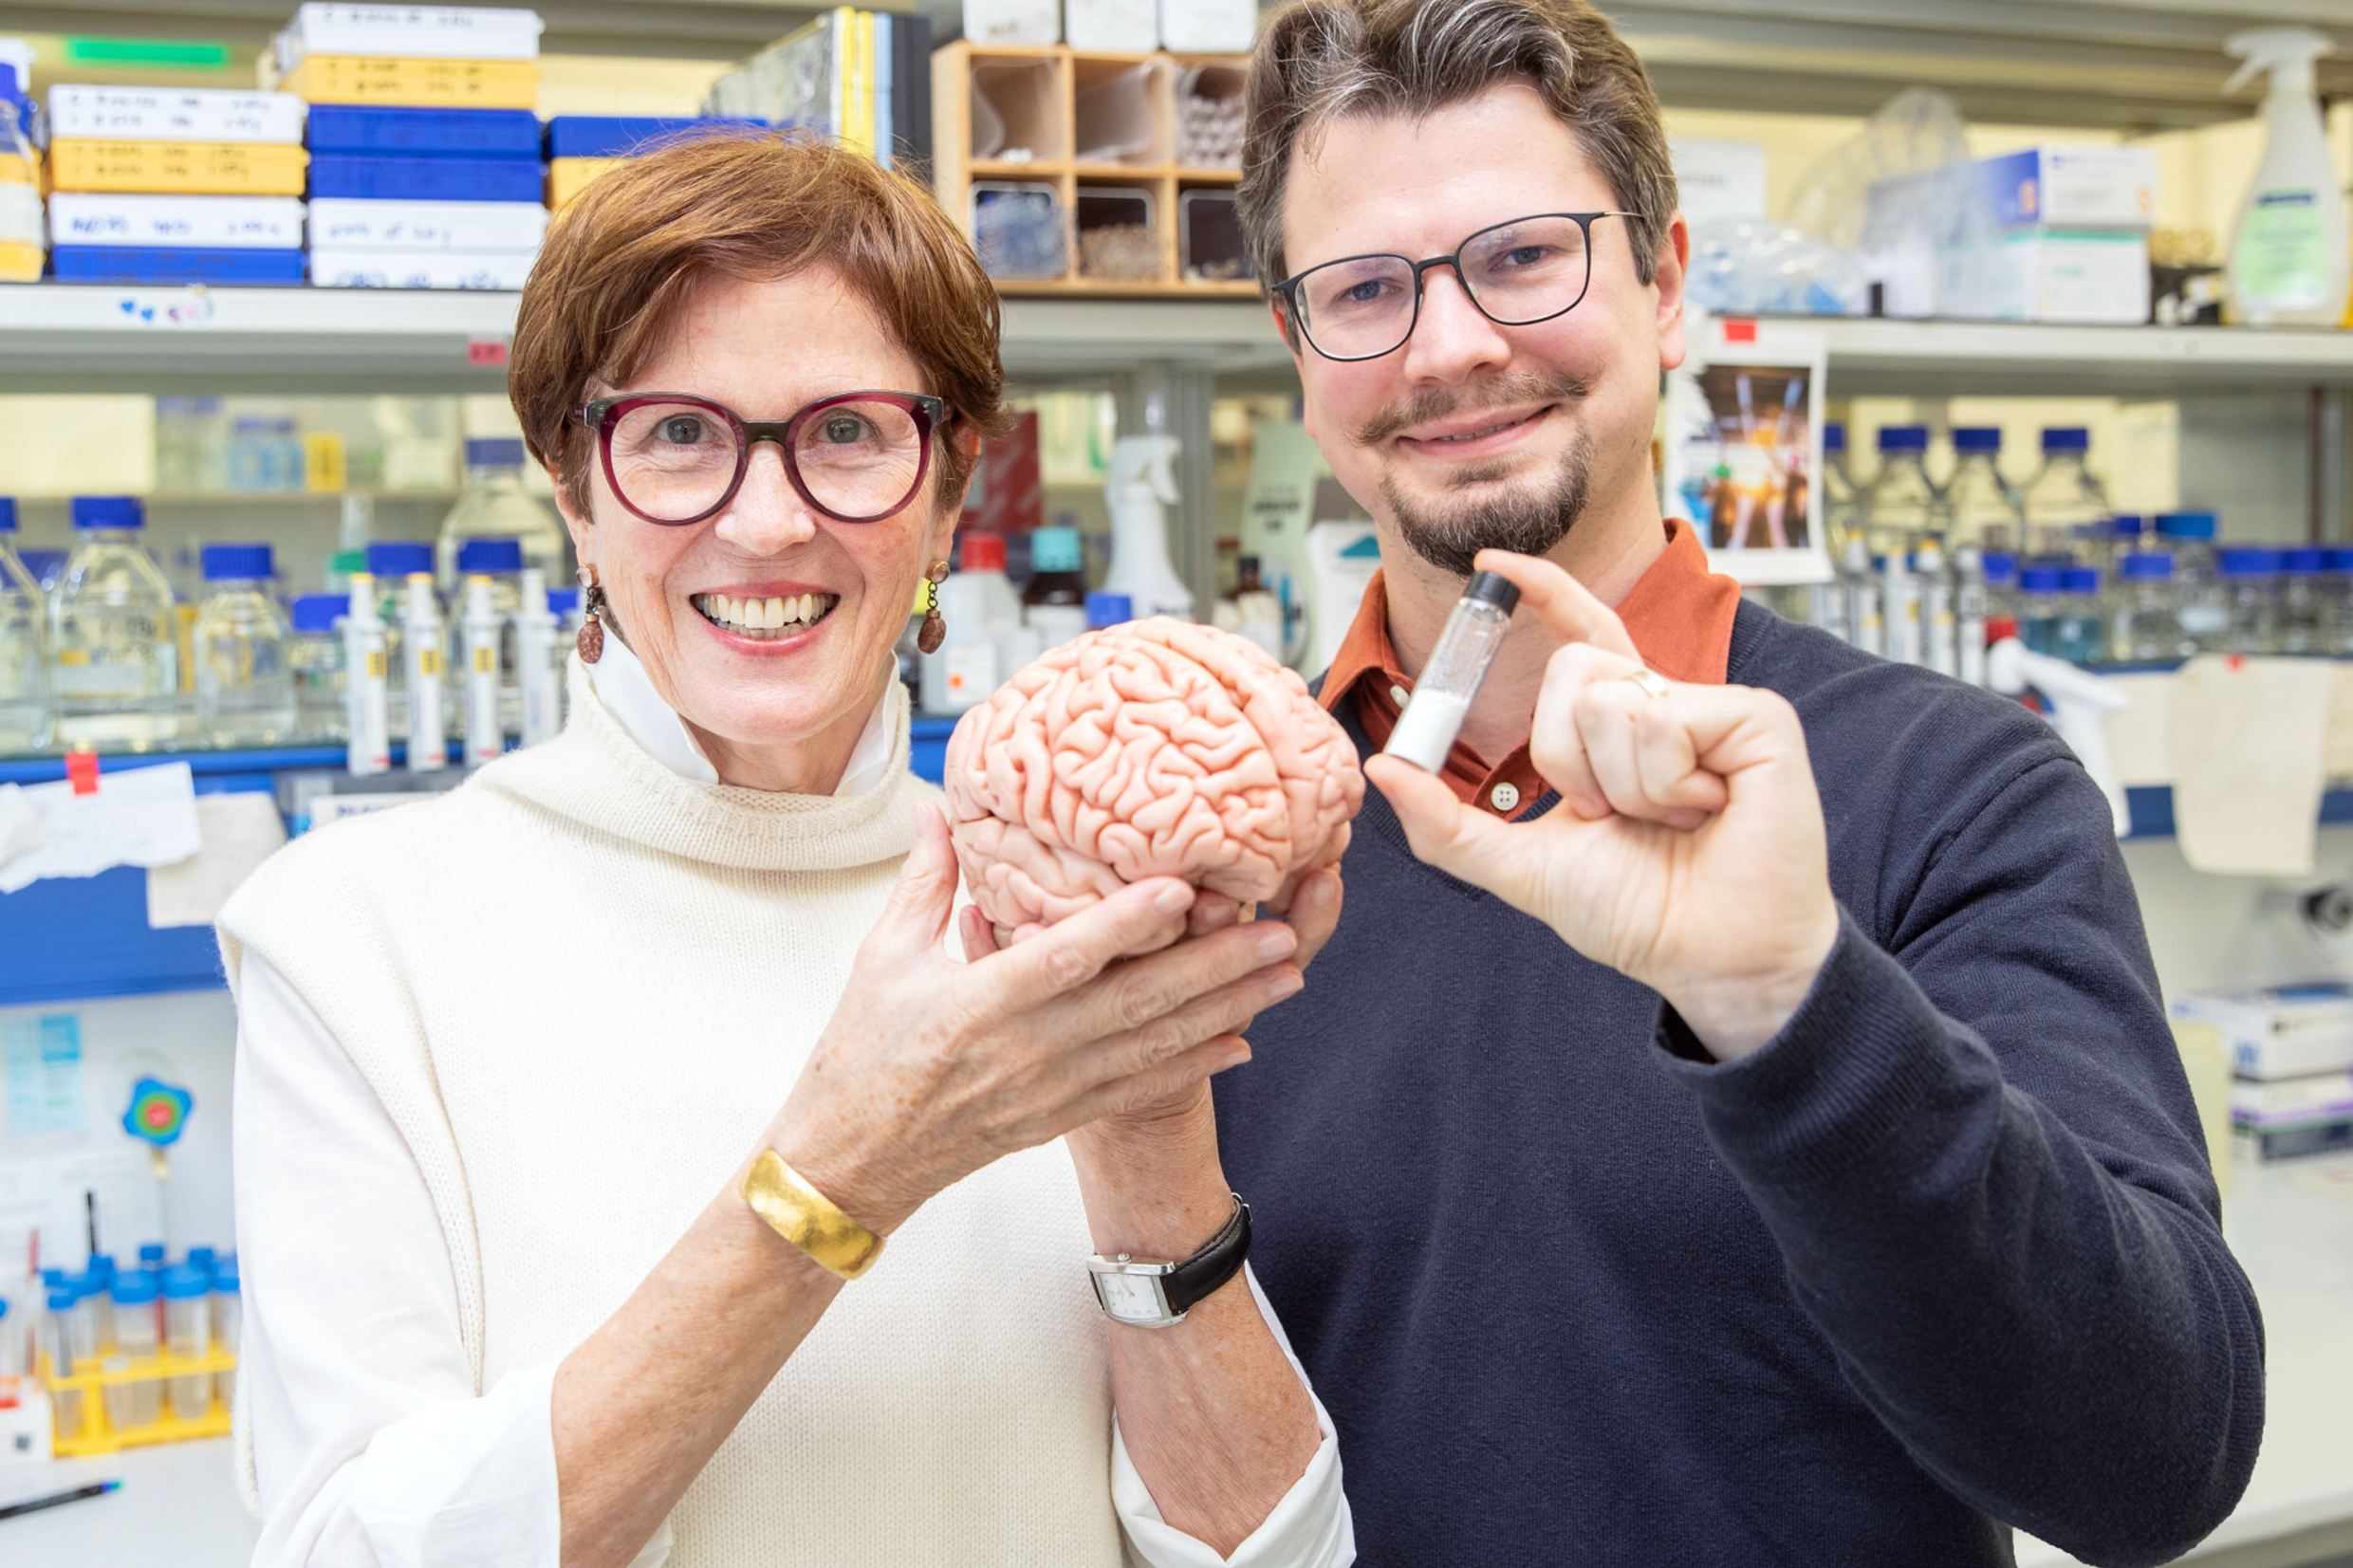 Professor Dr Rita Gerardy-Schahn and Dr Hauke Thiesler stand in a laboratory at the Institute of Clinical Biochemistry and show the model of a human brain and a tube of polysialic acid.